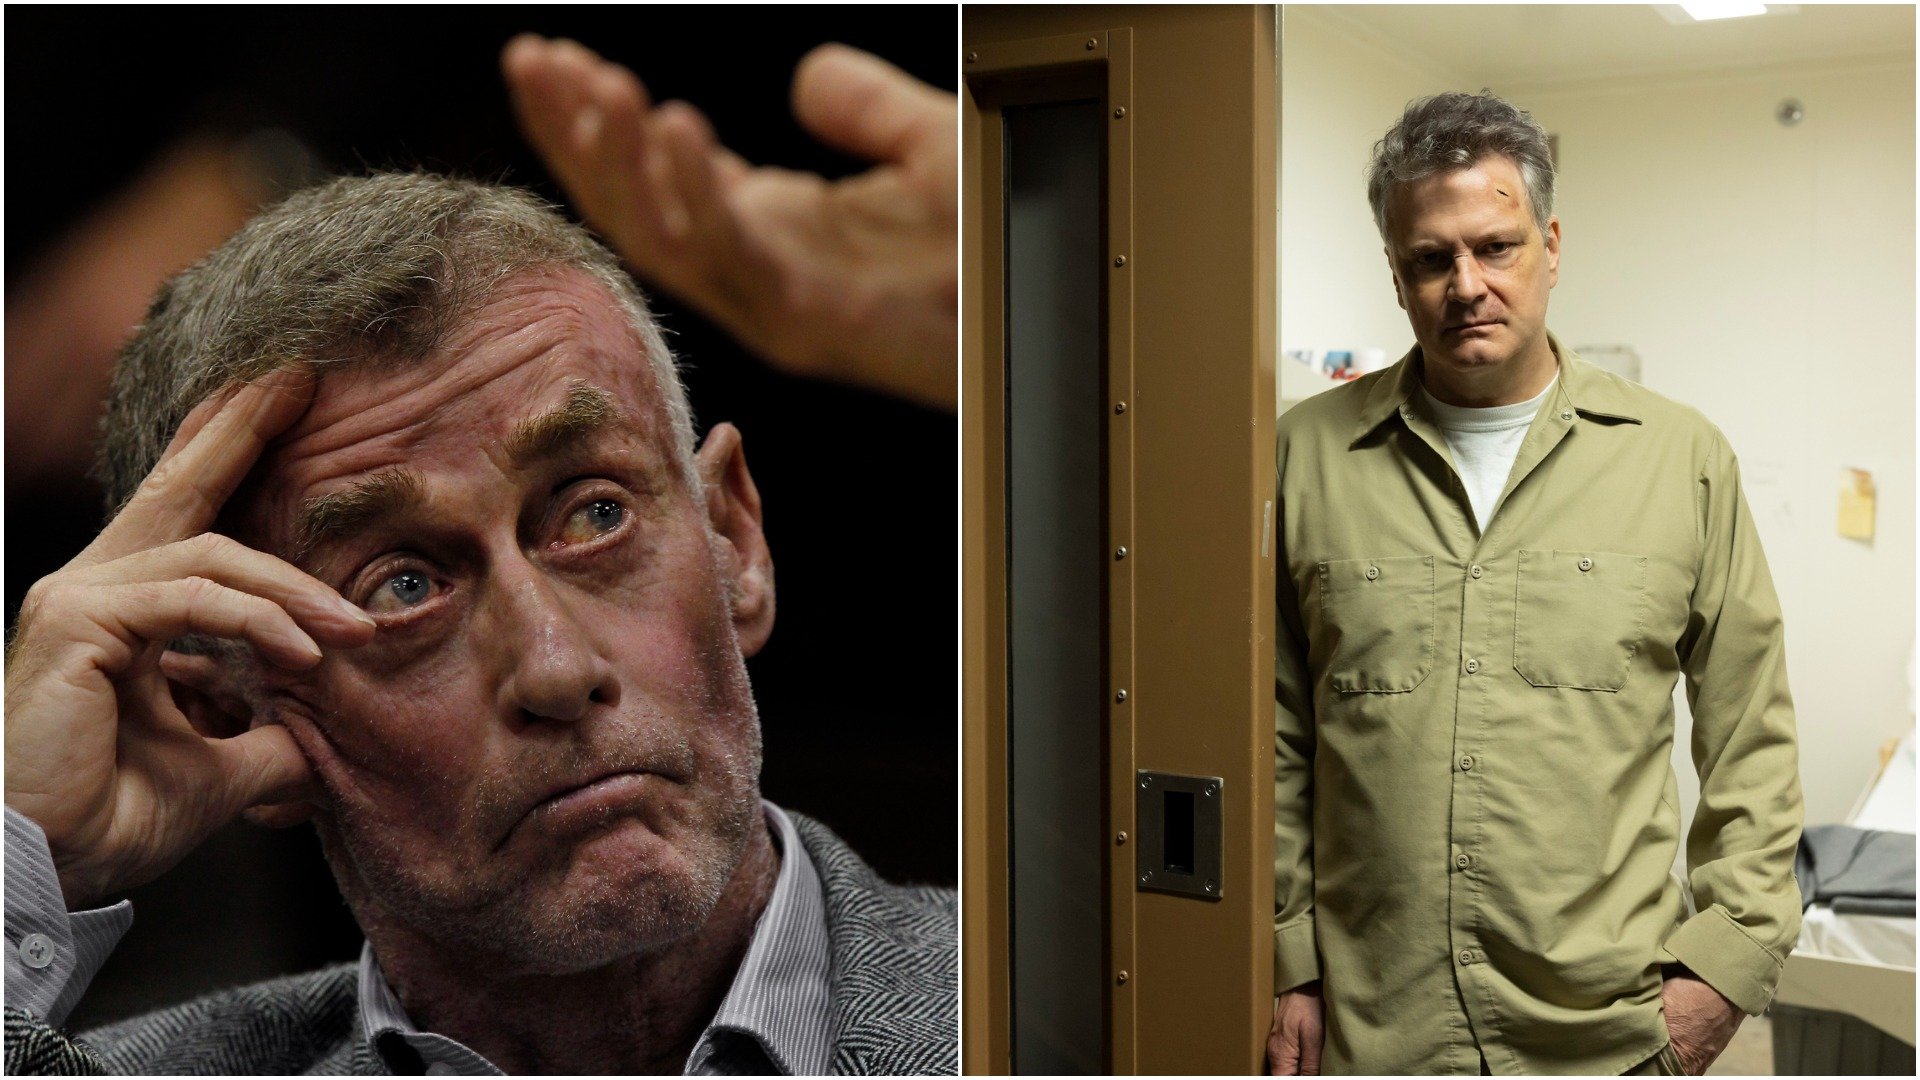 Michael Peterson in court in 2011; Colin Firth as Michael Peterson in 'The Staircase' on HBO Max